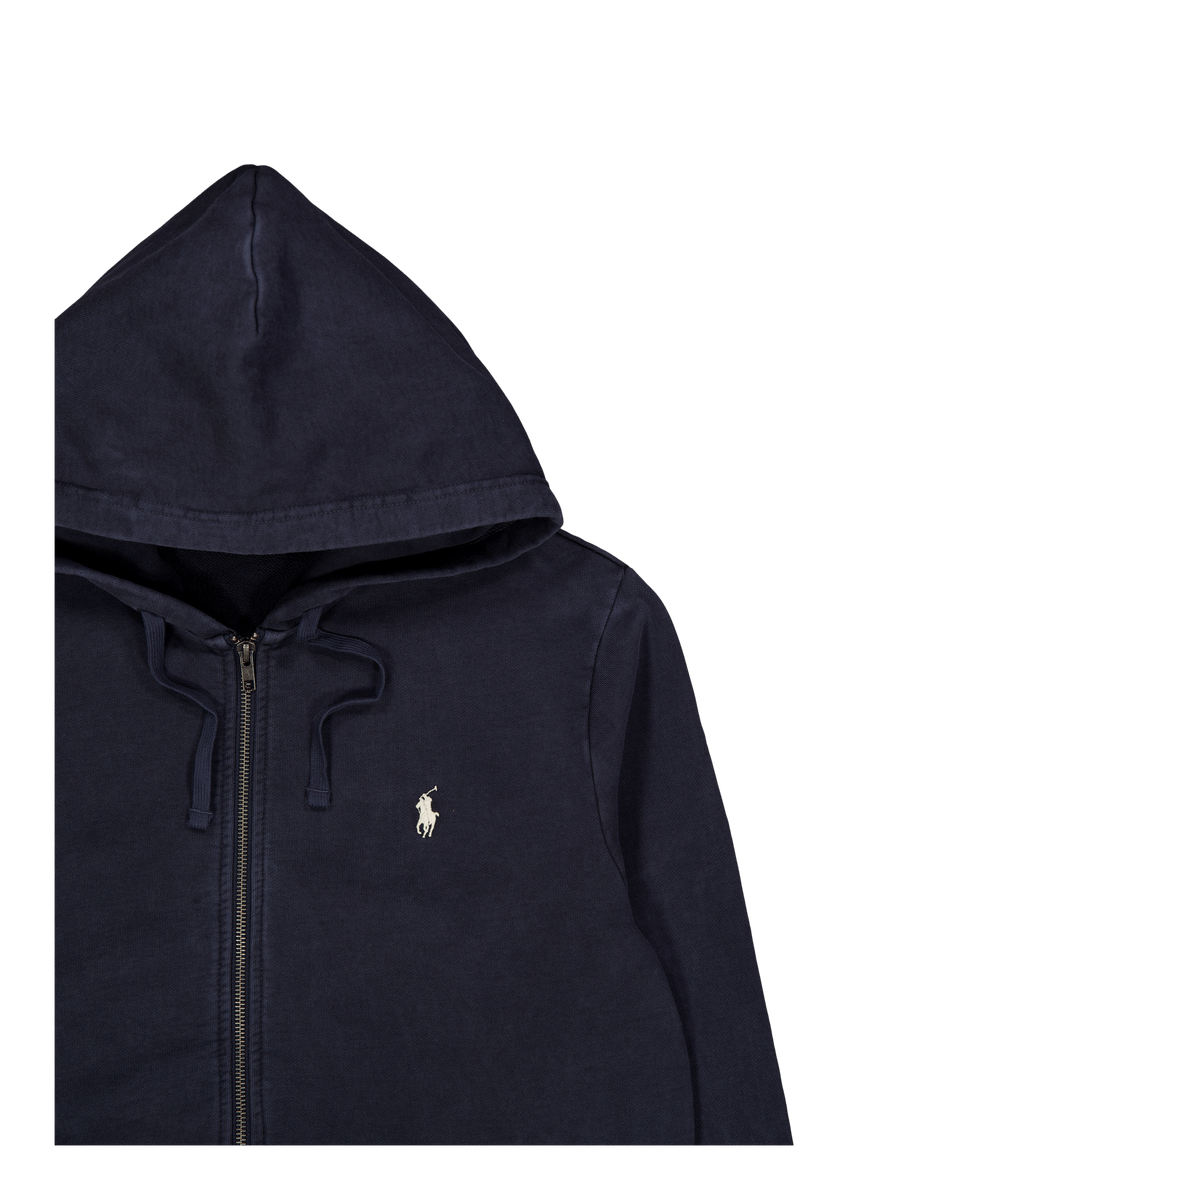 Polo Ralph Lauren Loopback Terry Zip Hoodie Faded Black Canvas - Polo ...